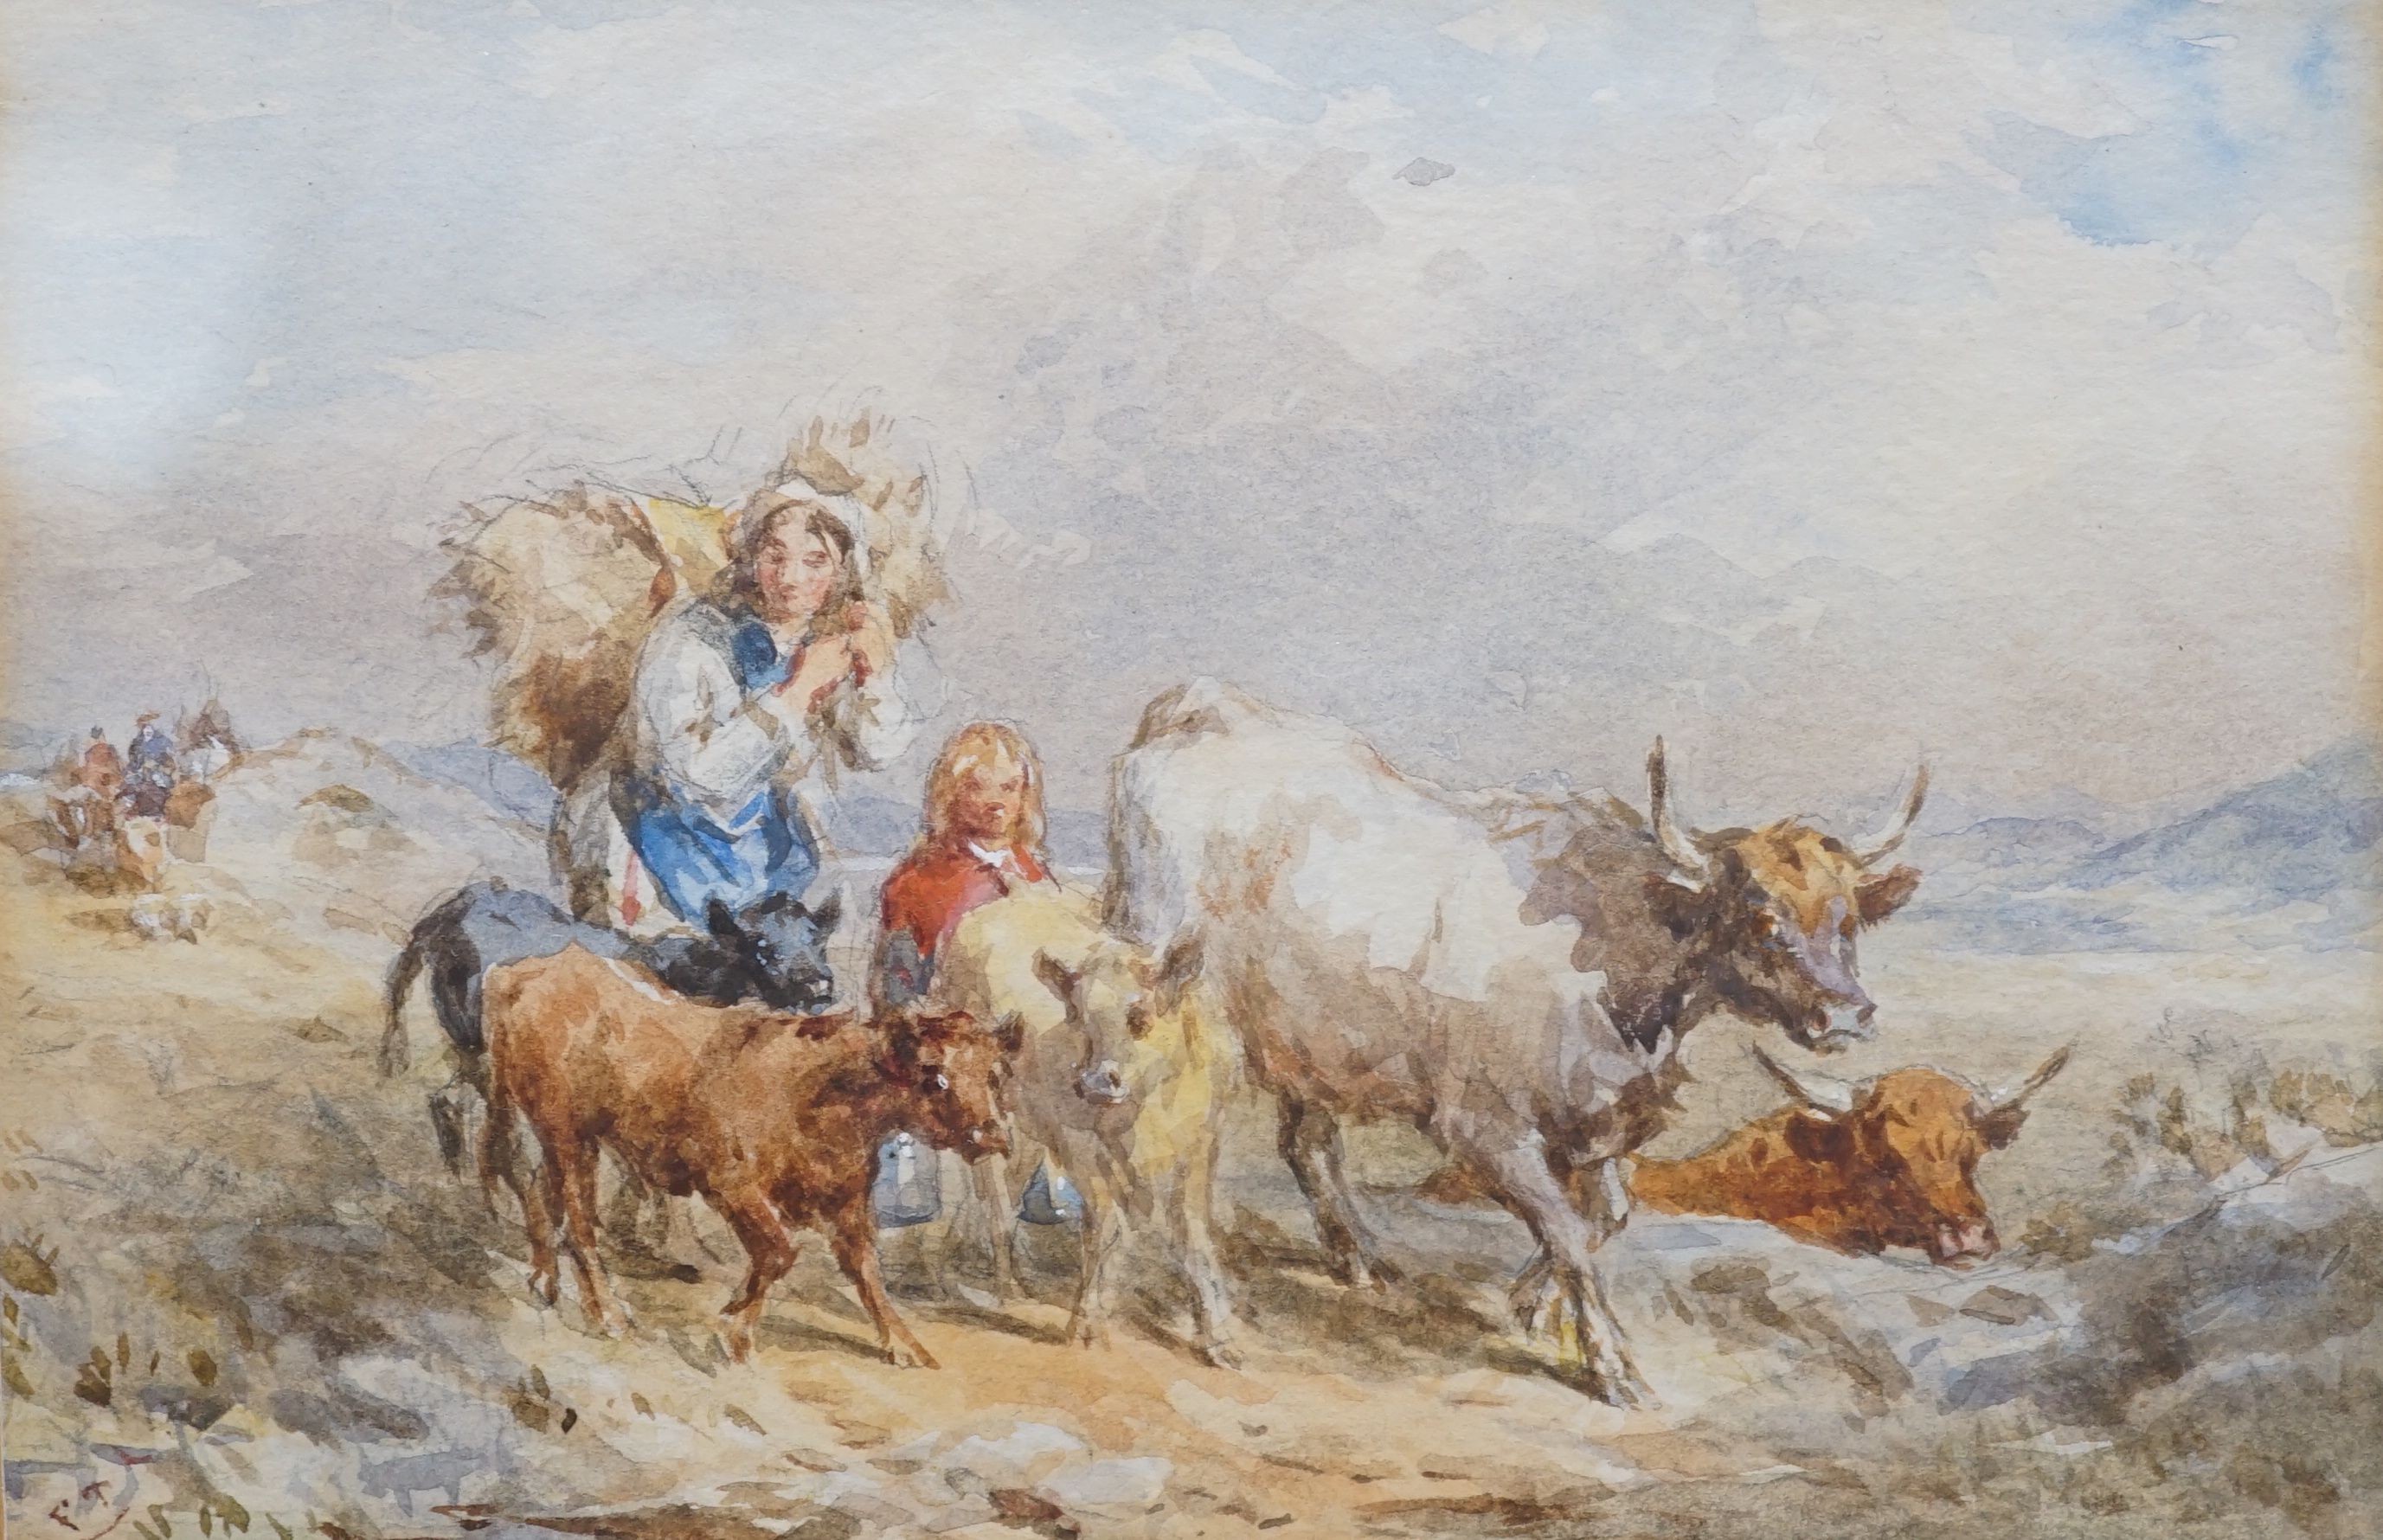 John Frederick Taylor (1802-1889), Milkmaid with cows on a country road, watercolour, signed